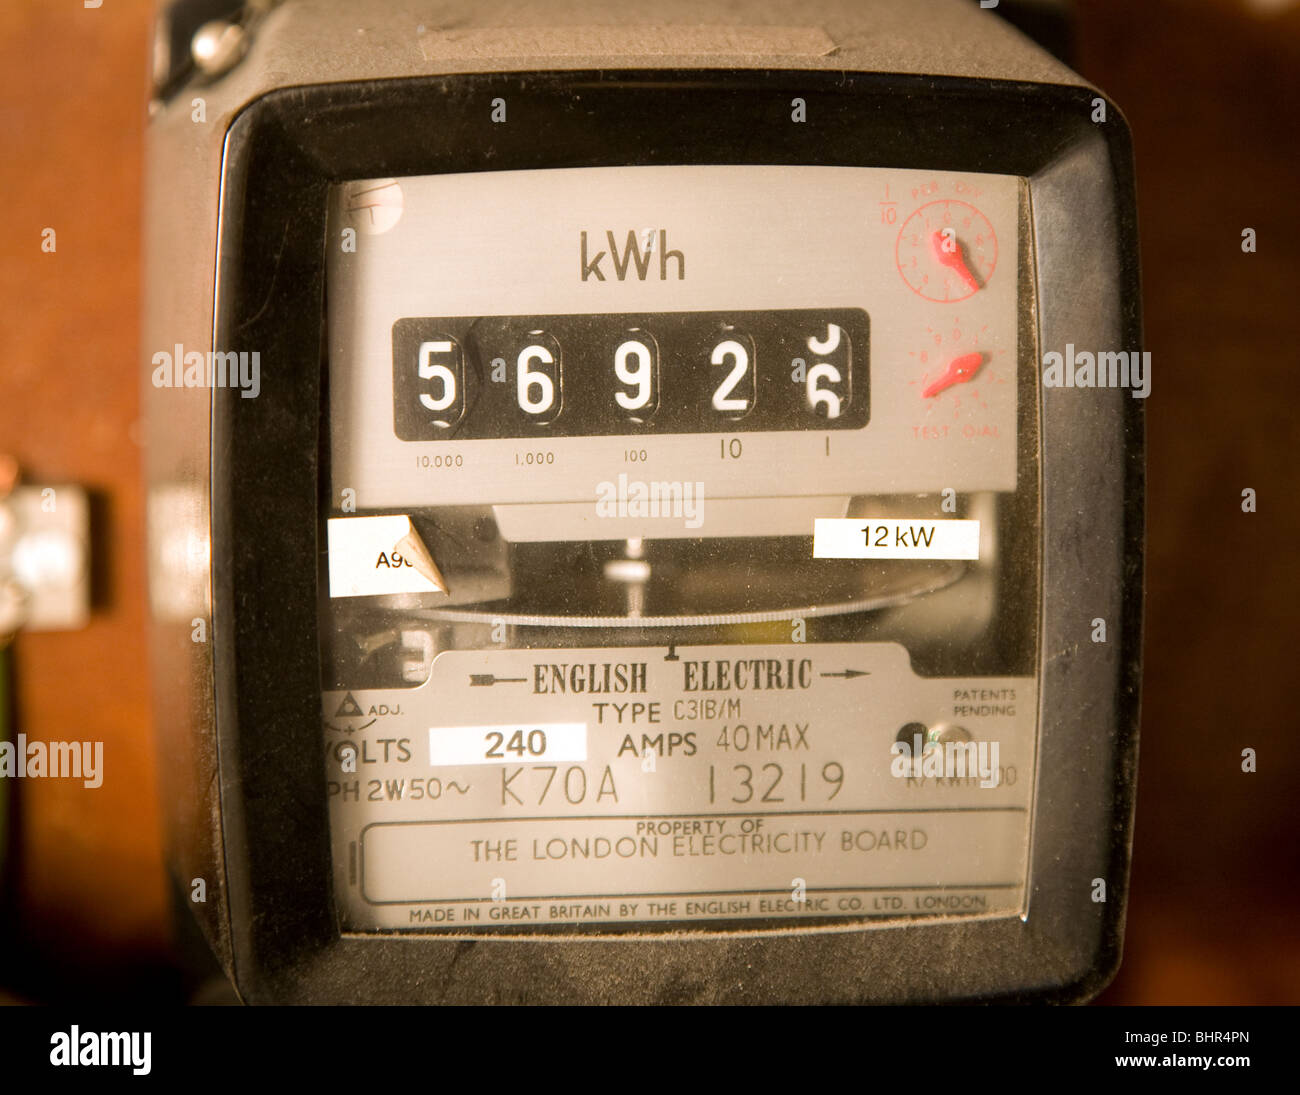 Domestic electricity meter Stock Photo